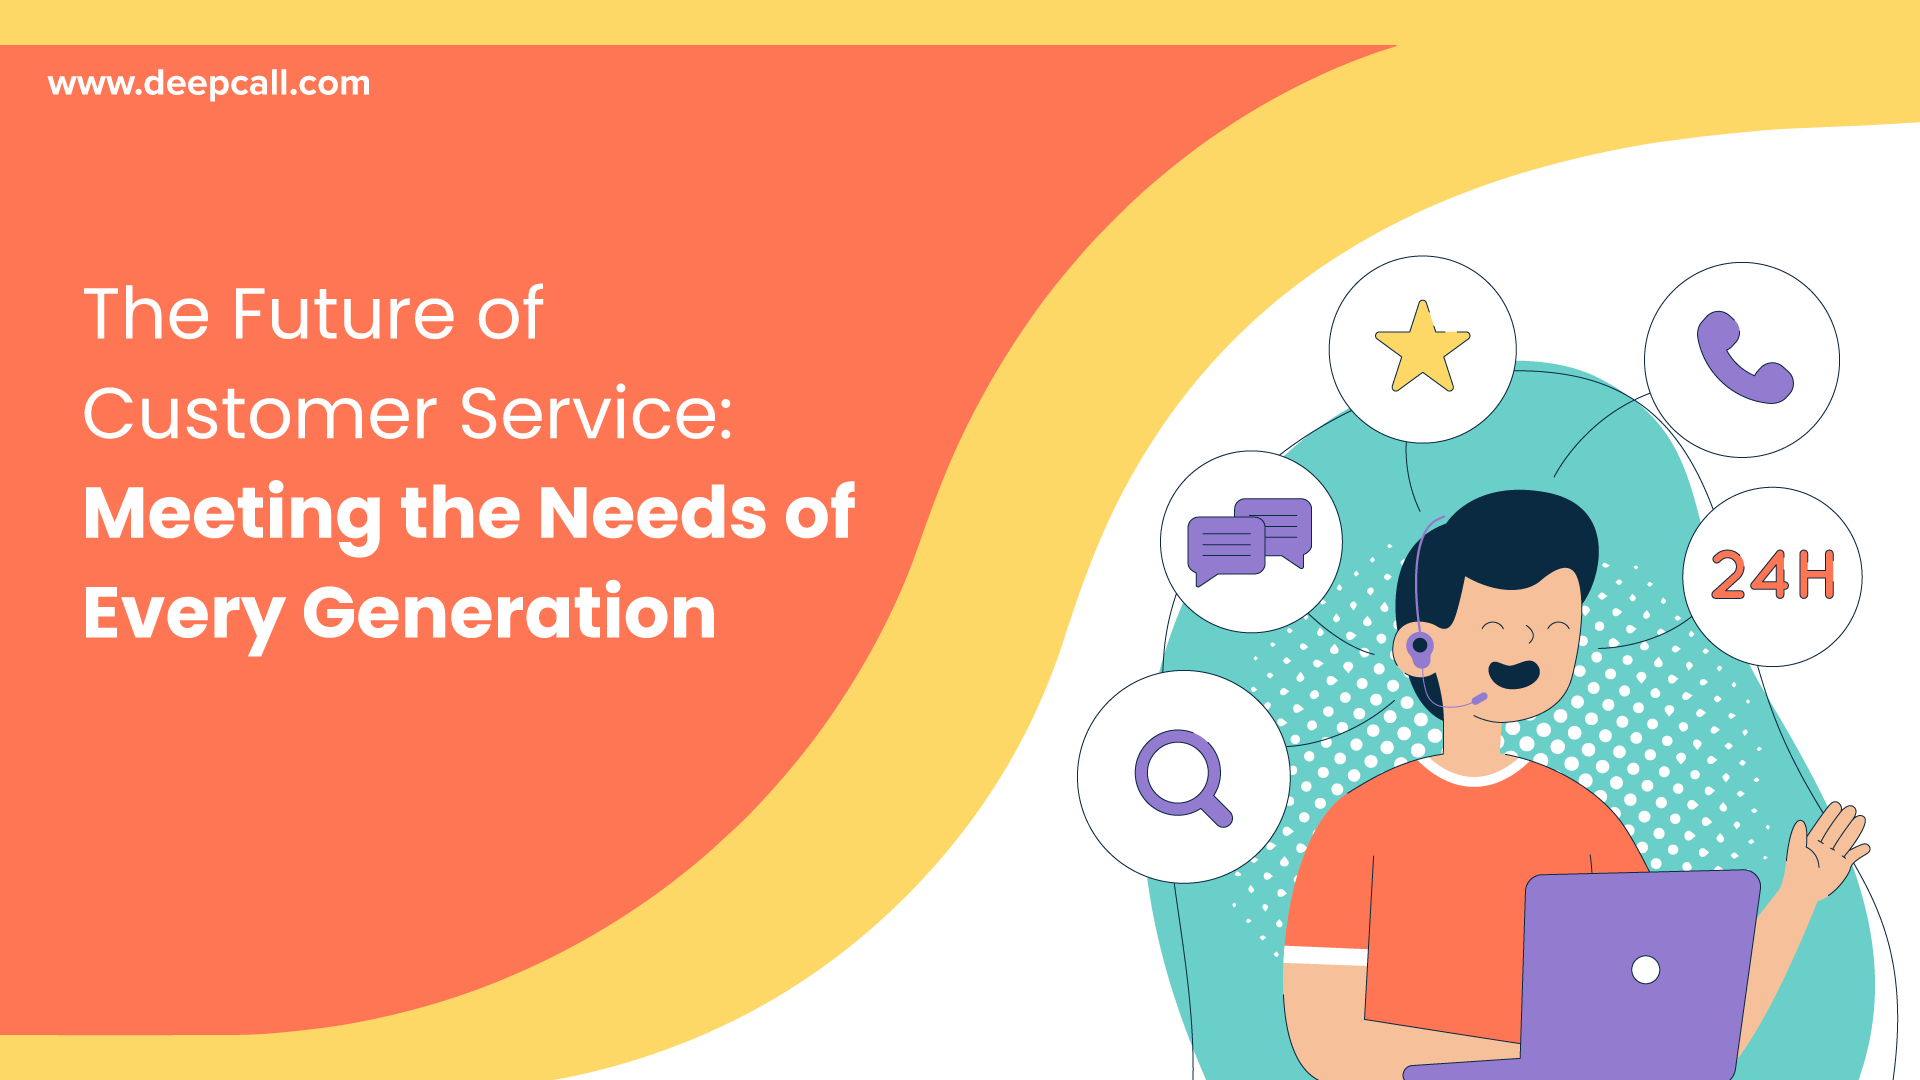 The Future of Customer Service: Meeting the Needs of Every Generation